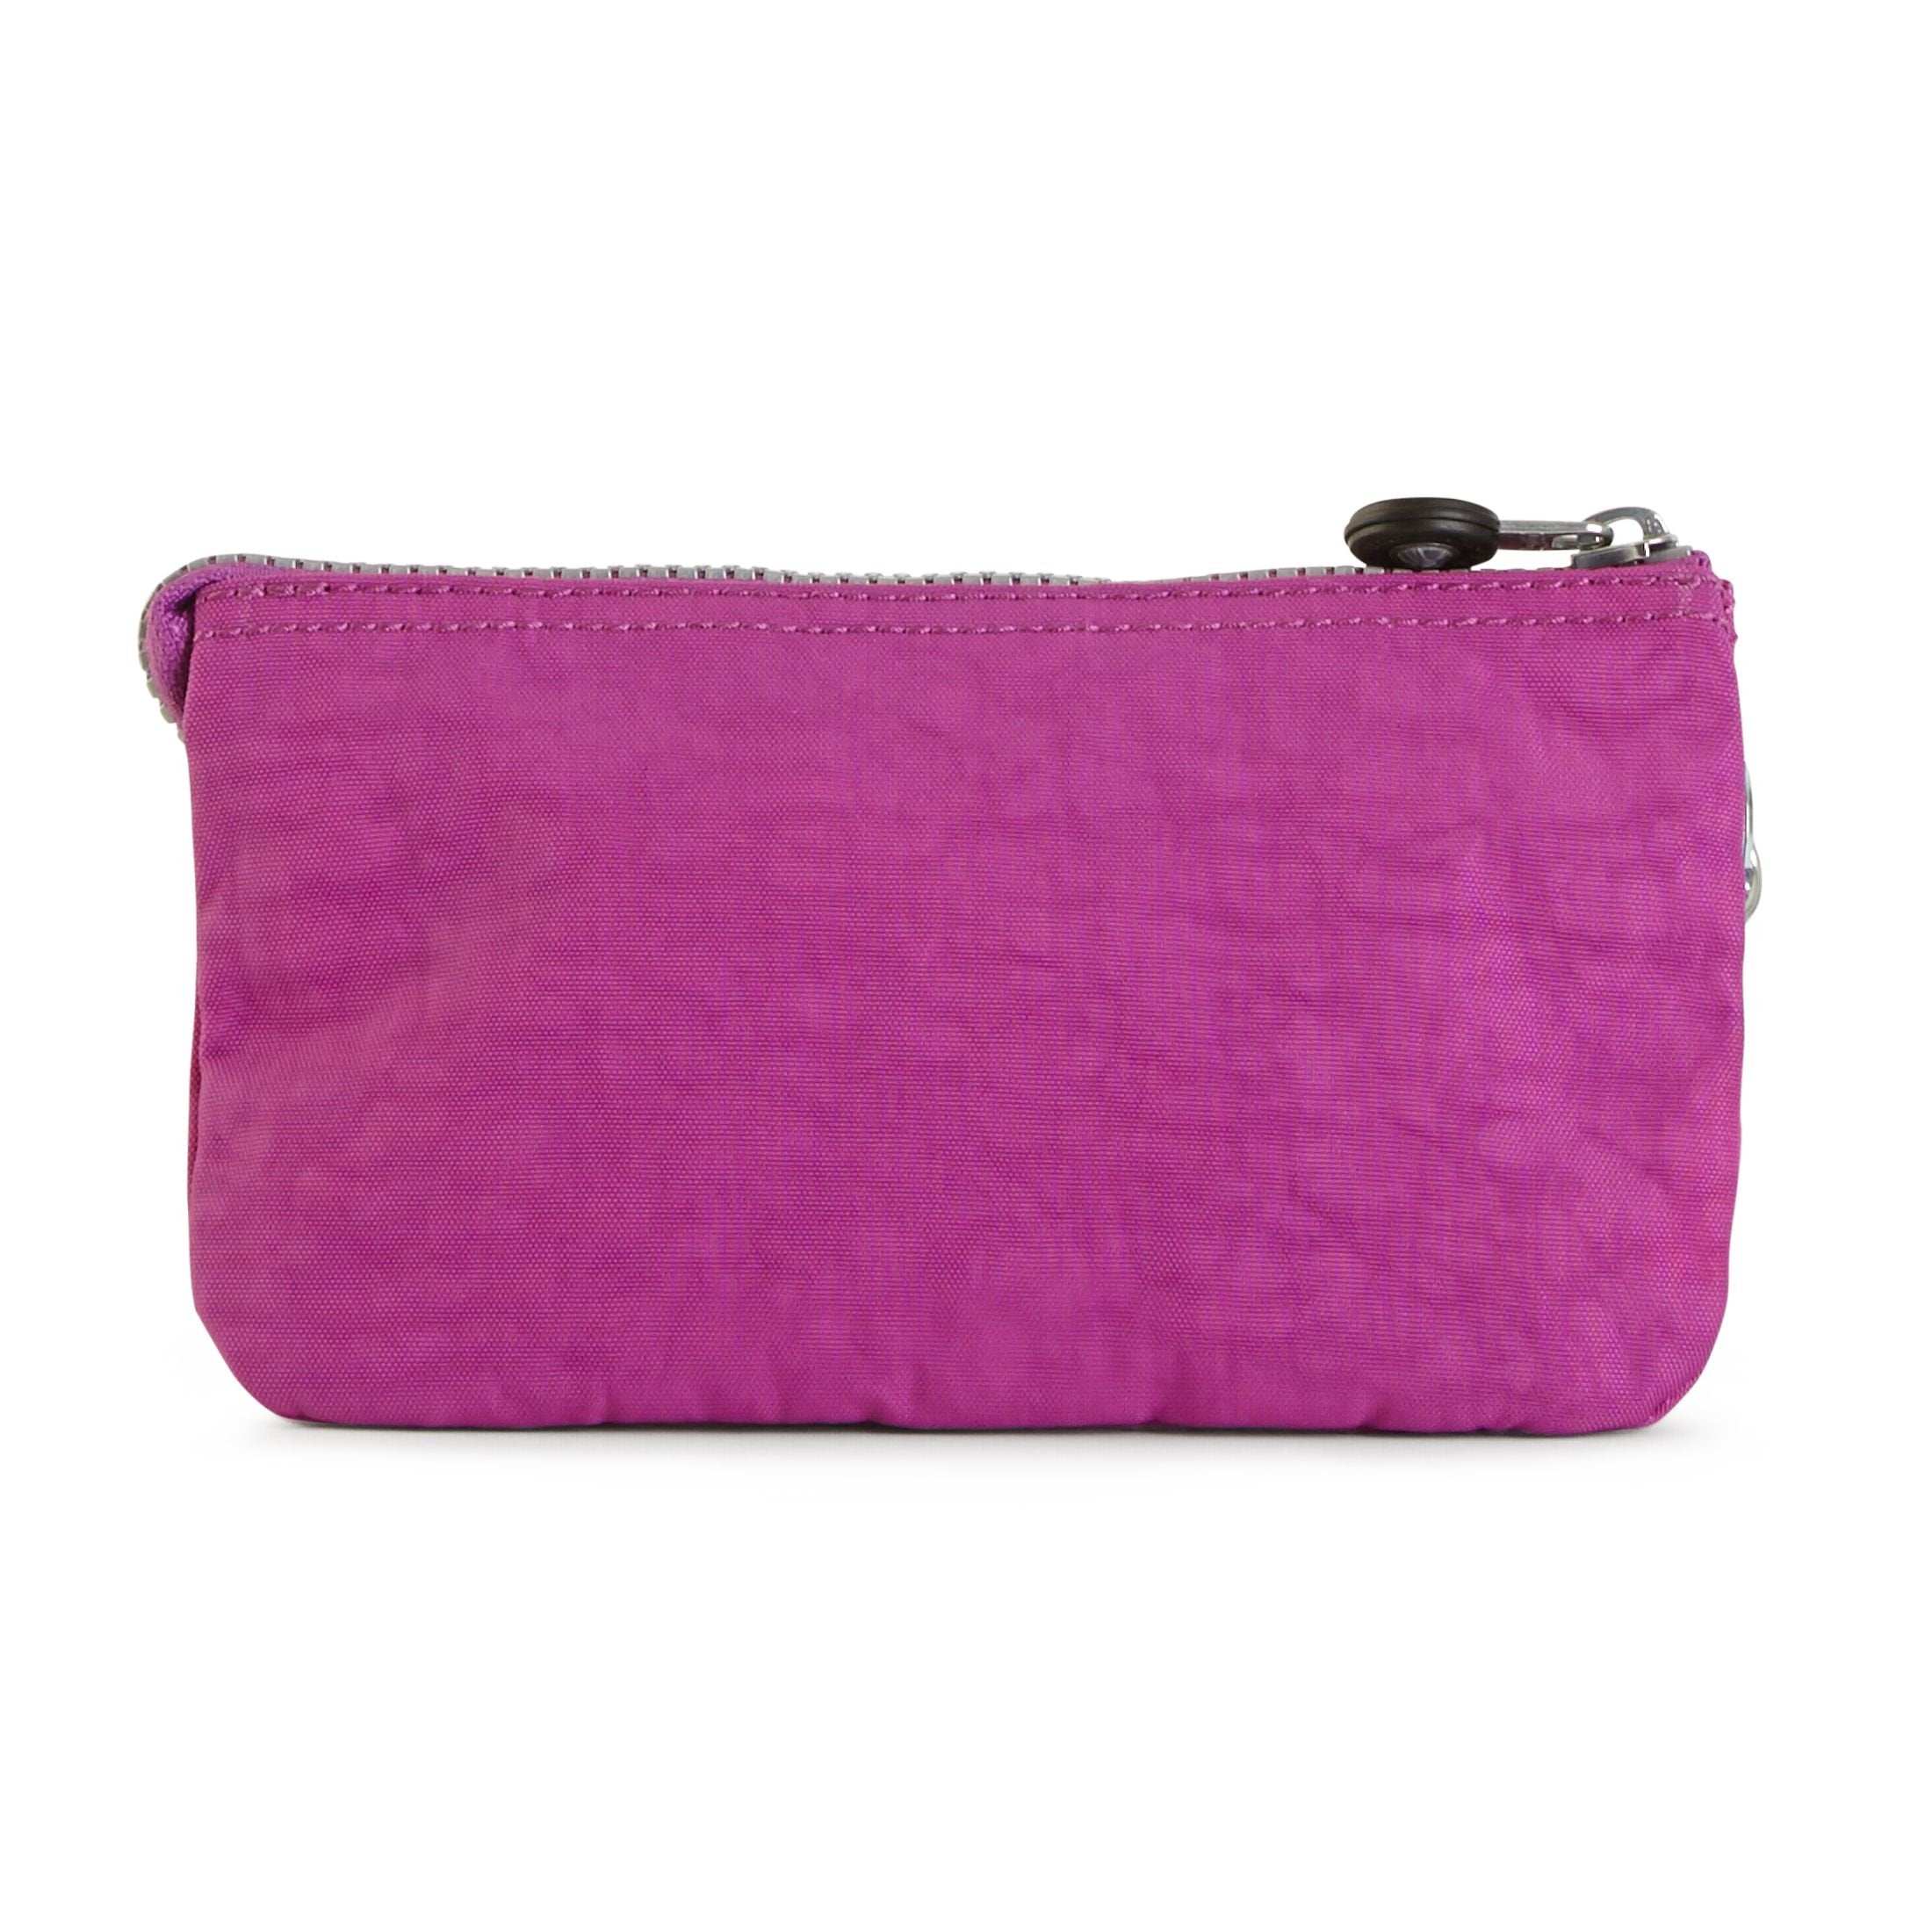 Creativity Large Pouch